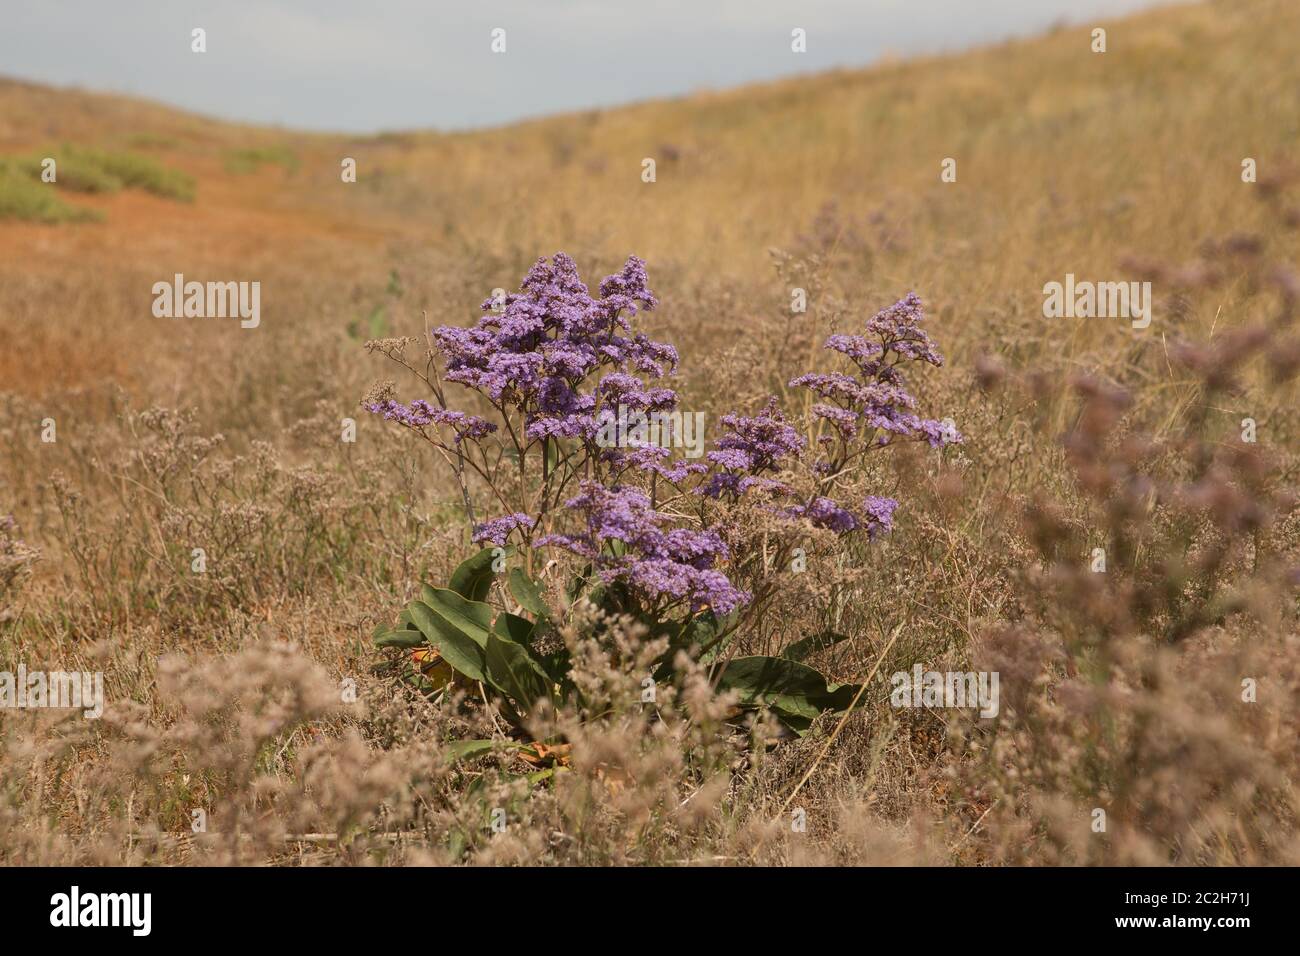 Stem of Limonium vulgare Mill with flowers on nature background Stock Photo